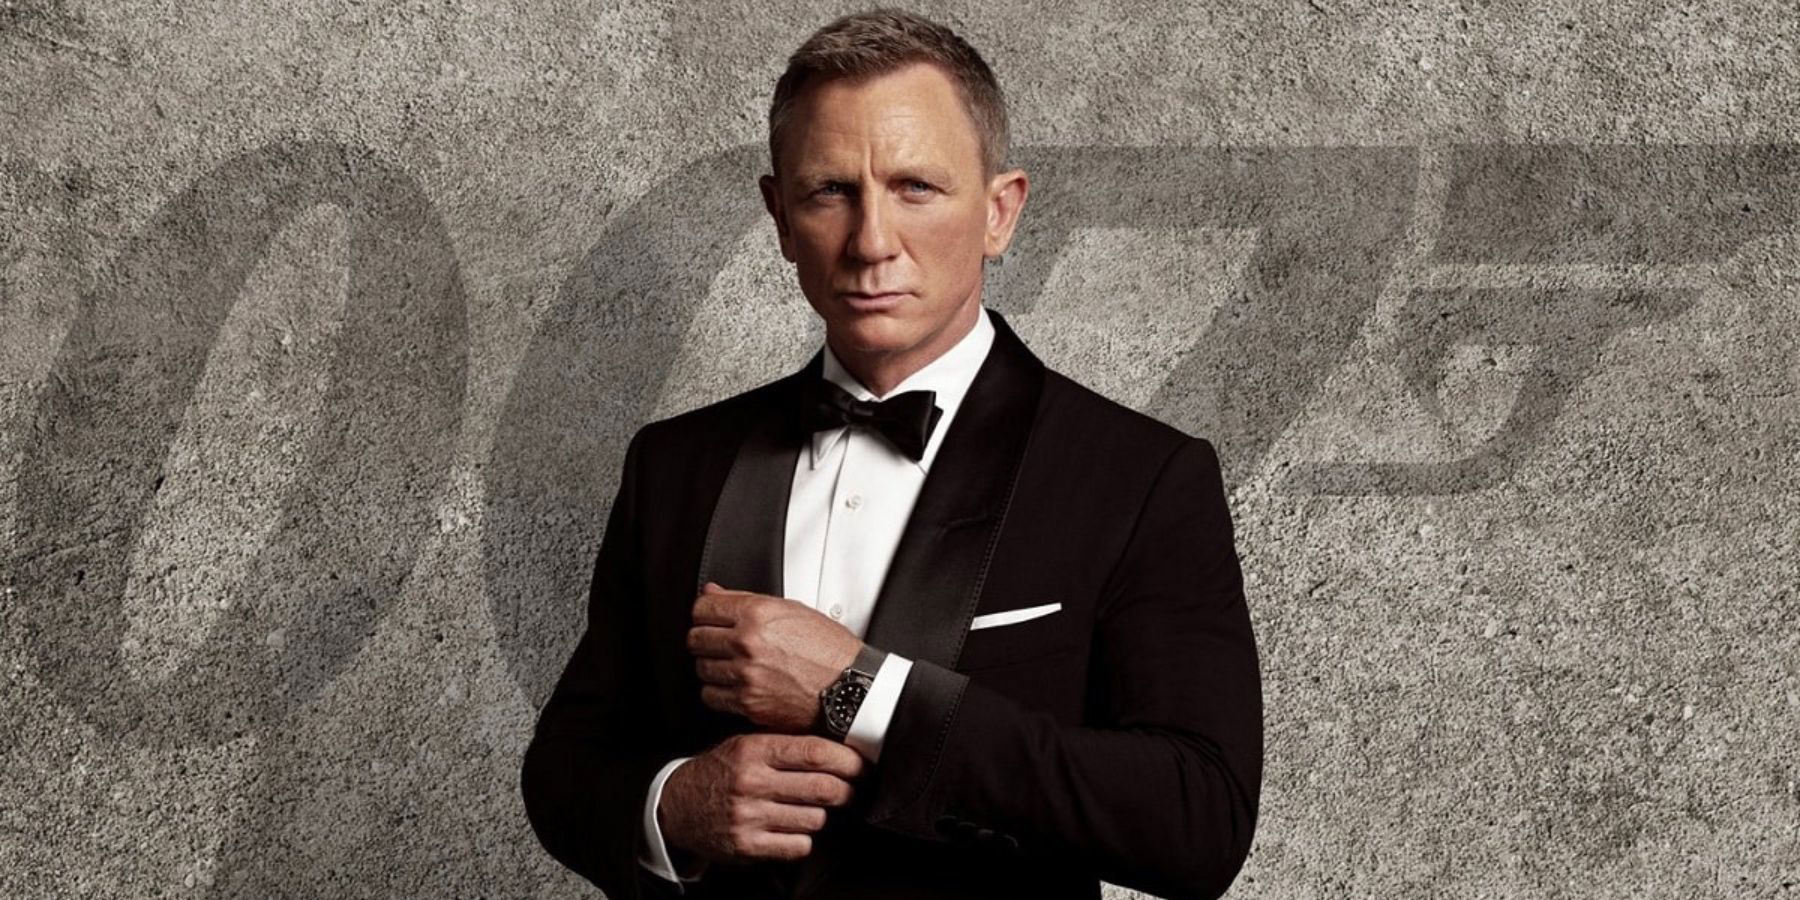 James Bond: What Does The 007 Code Name Mean?